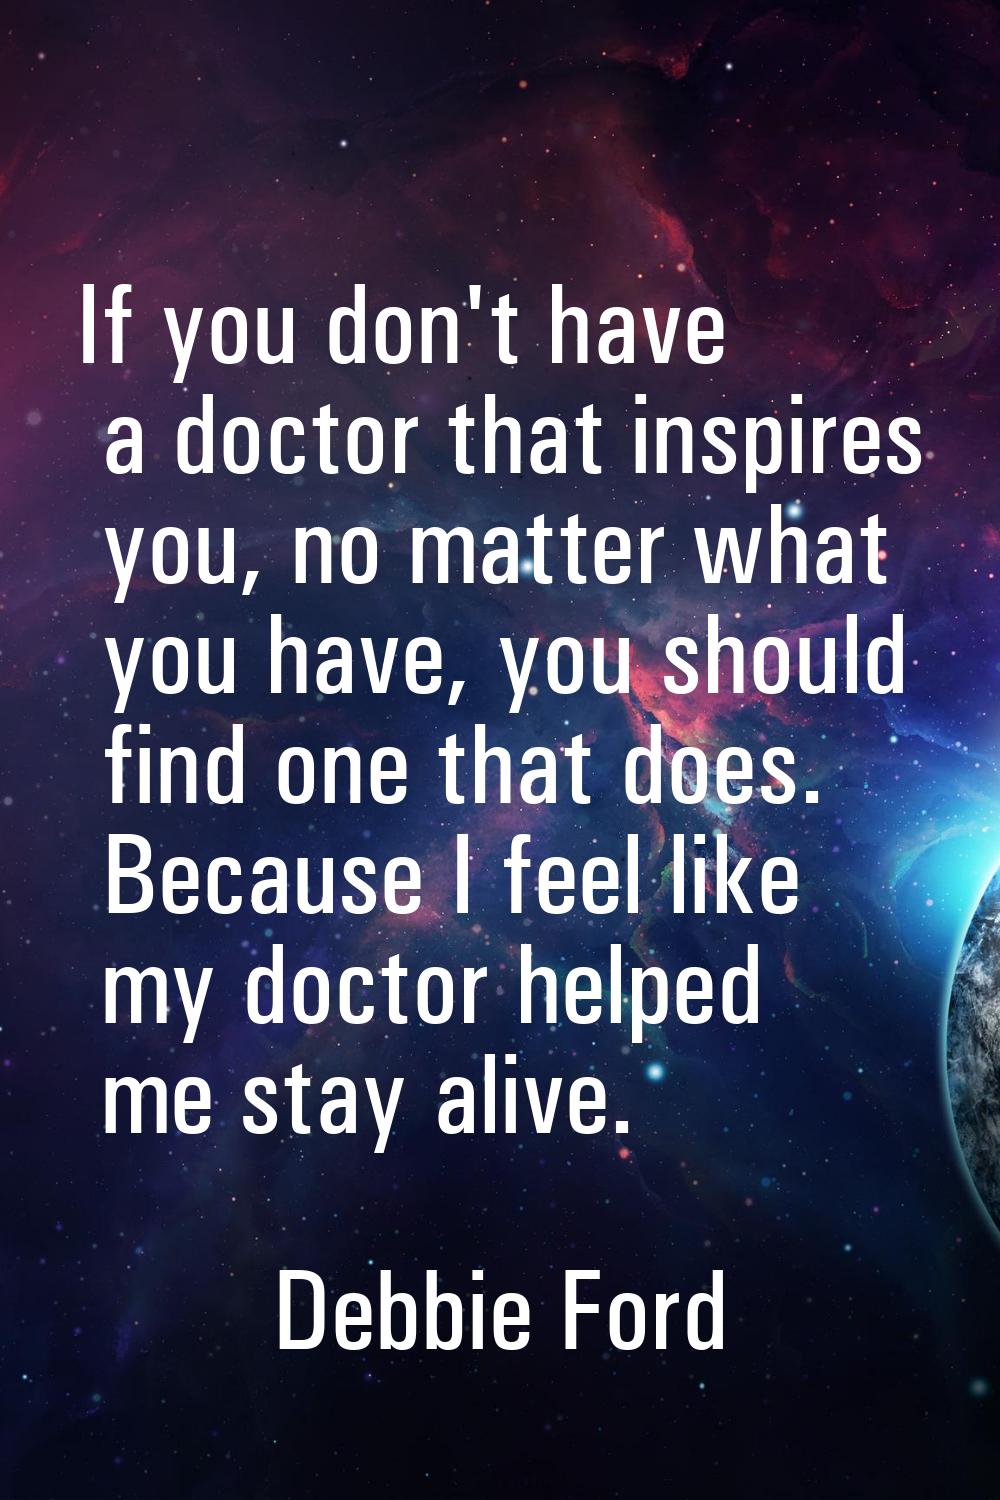 If you don't have a doctor that inspires you, no matter what you have, you should find one that doe